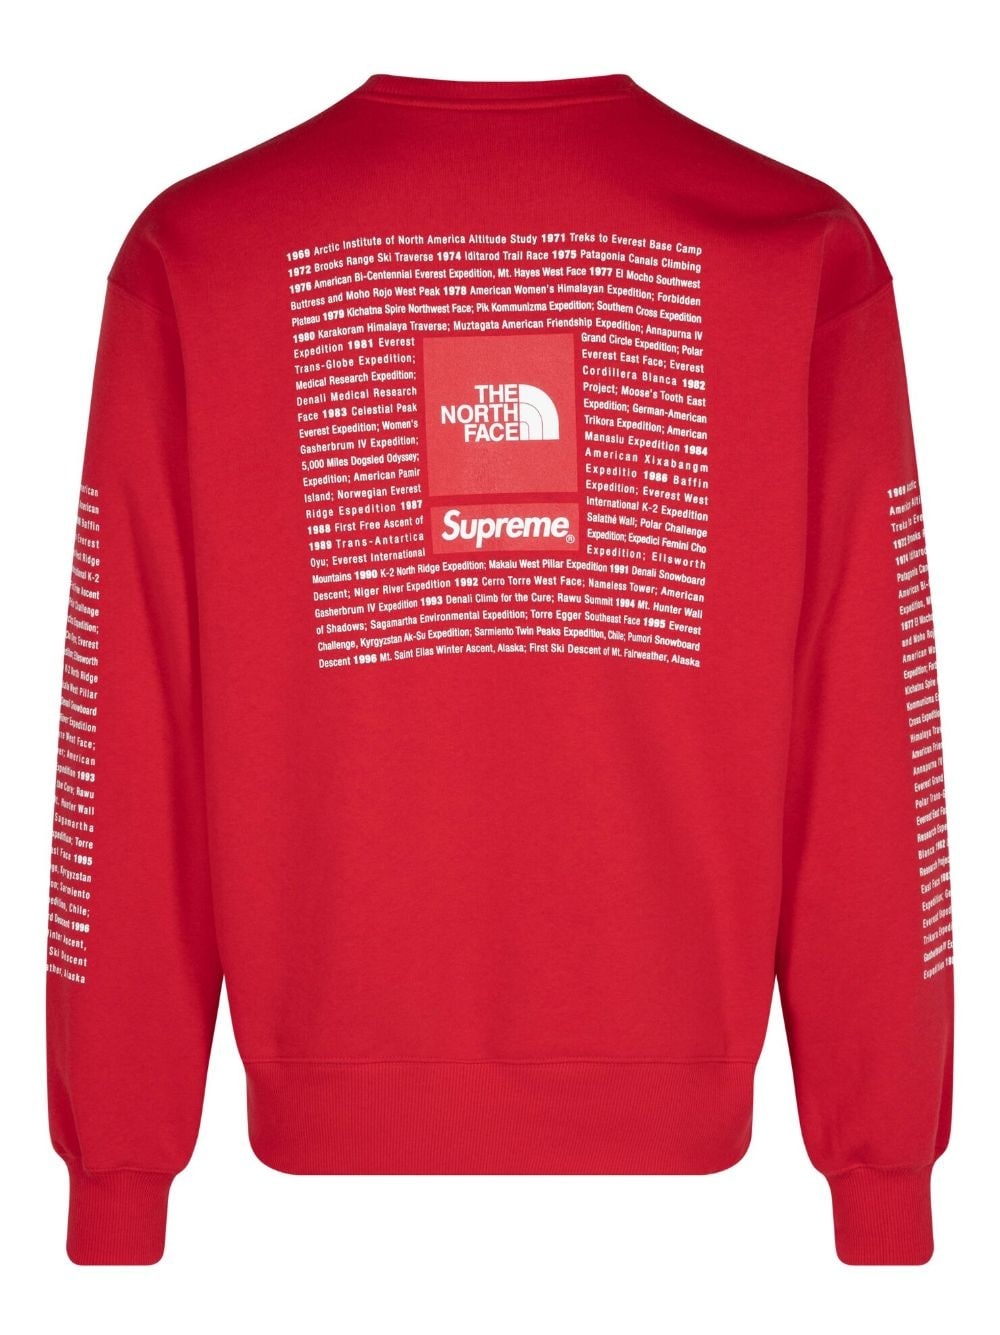 x The North Face "Red" sweatshirt - 3